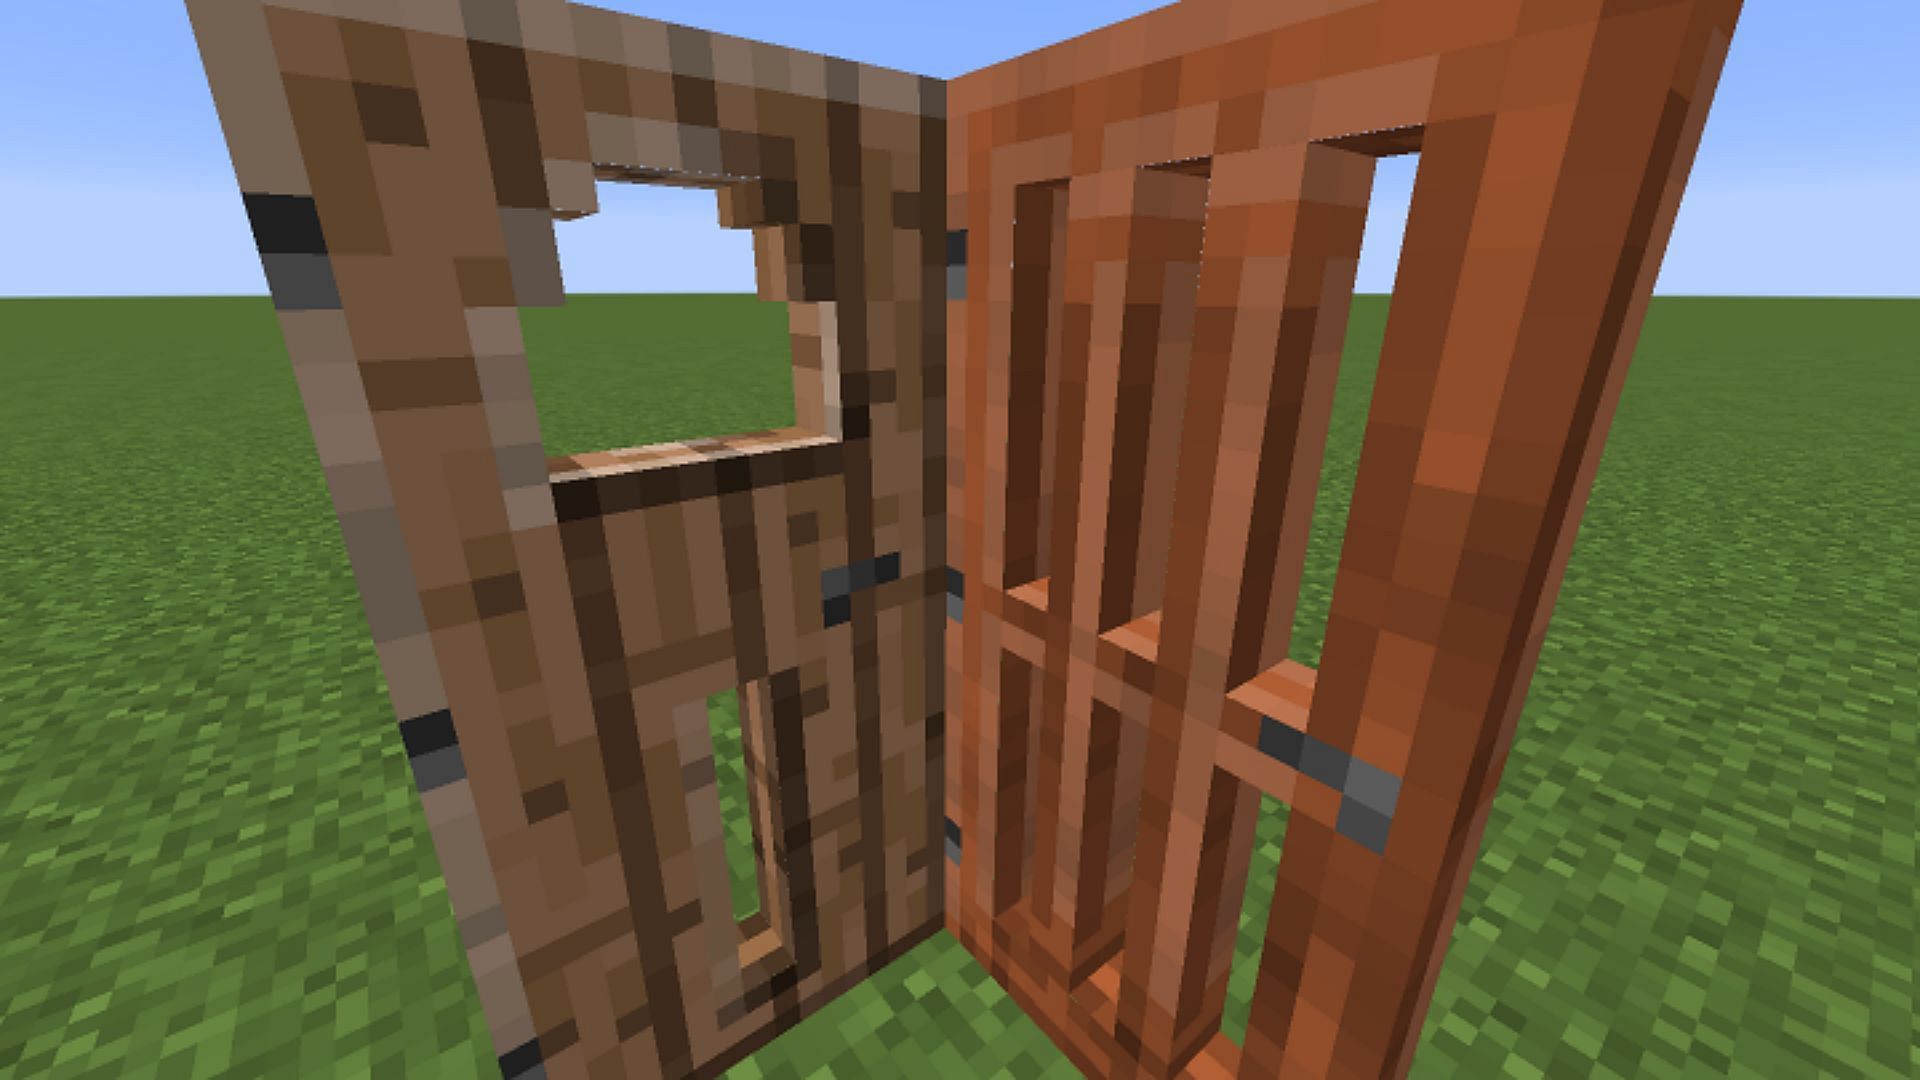 Minecraft Redditor discovers 3D gate textures in one of the snapshots (Image via Sportskeeda)